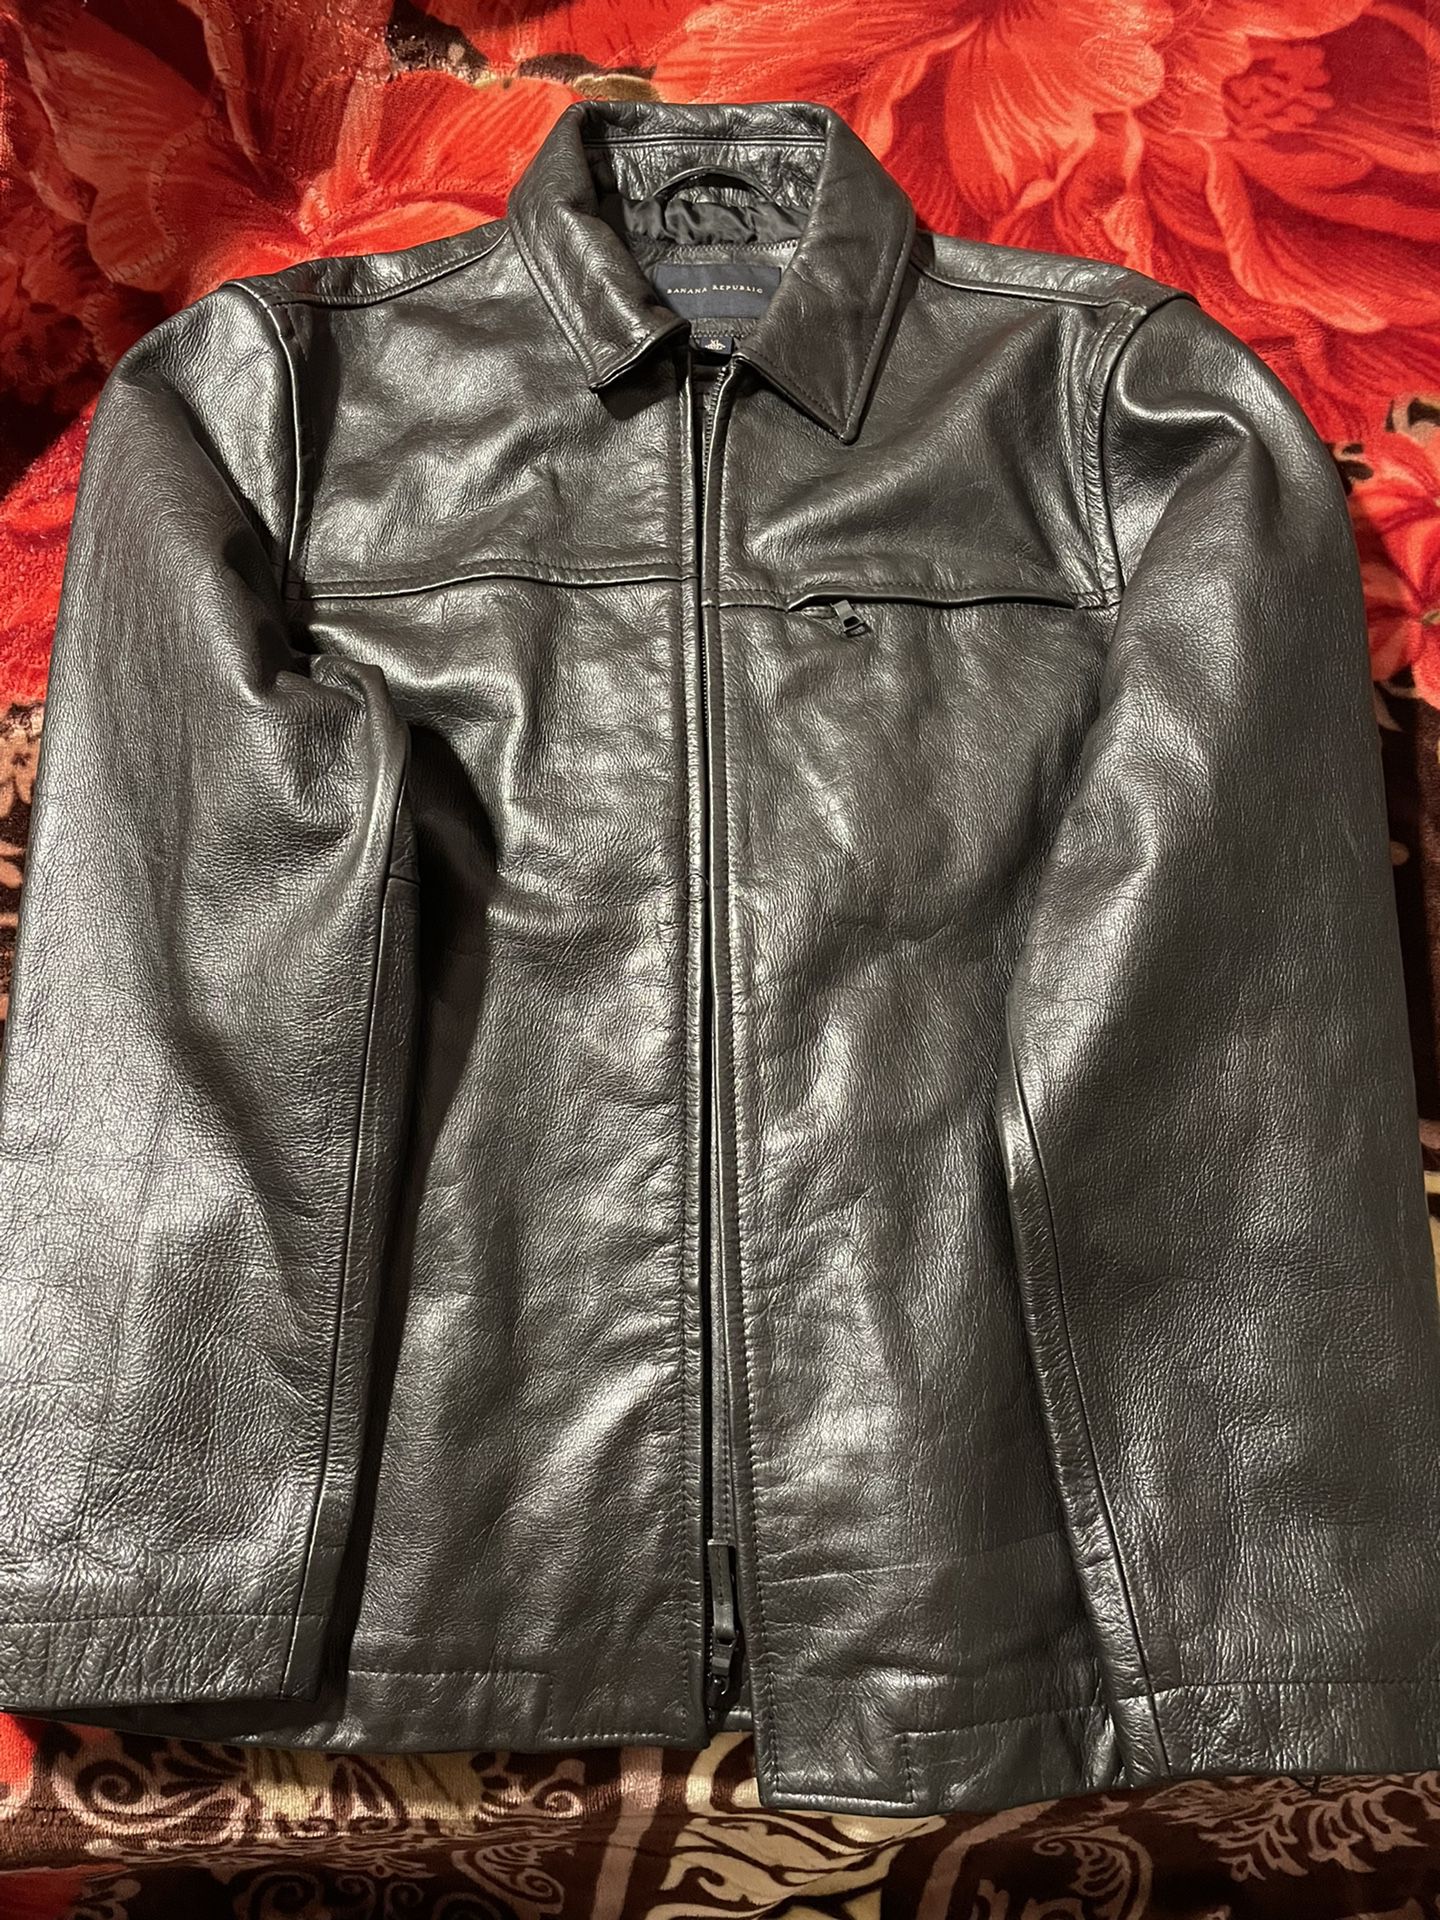 Banana Republic Leather Jacket Full Zip Collard Stand-up/Spread Collar Men's Size XL EXTRA LARGE Black RN 54023    